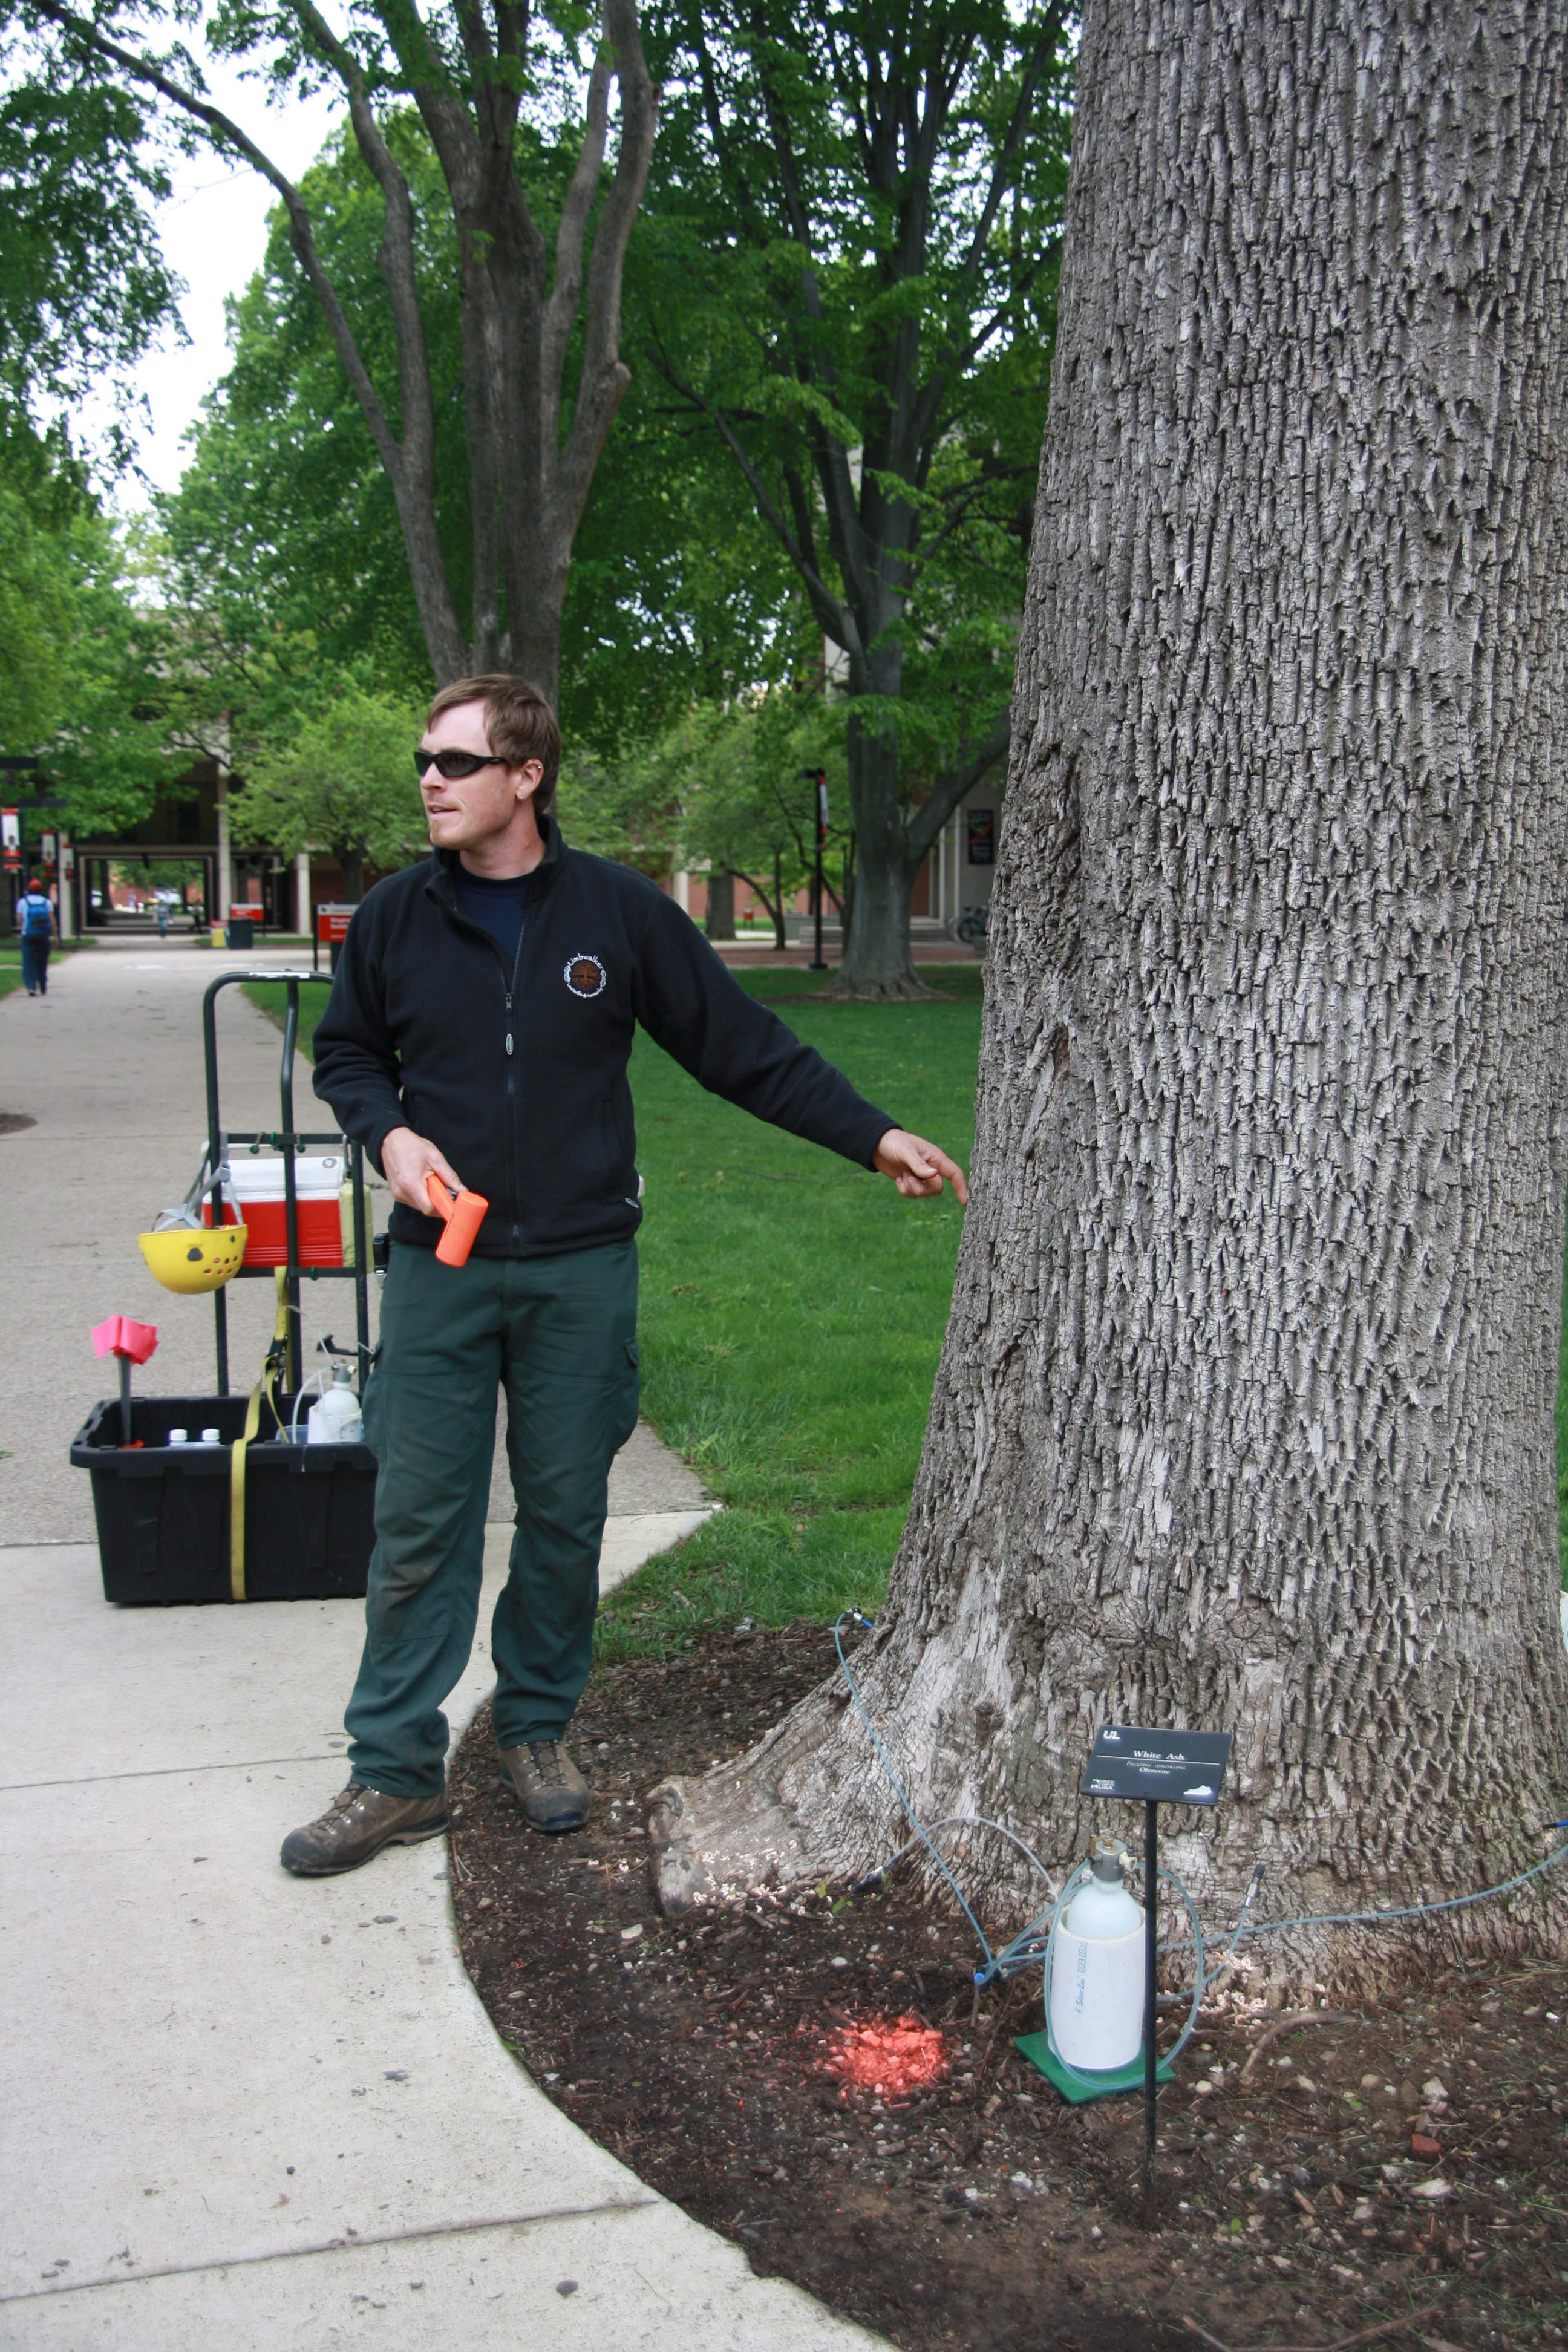 Ash trees like this one on Belknap Campus are being treated to protect them from the emerald ash borer.